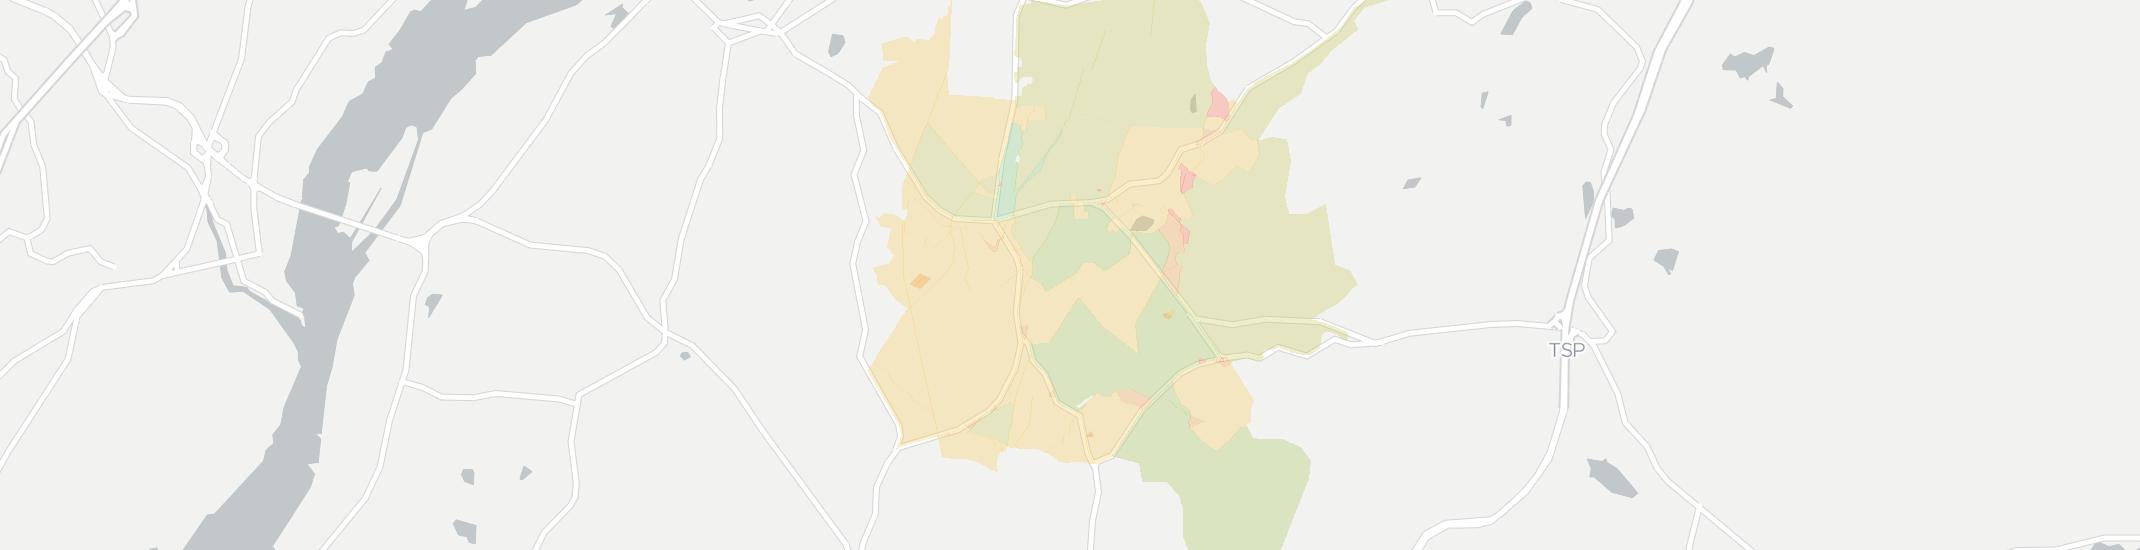 Claverack Internet Competition Map. Click for interactive map.